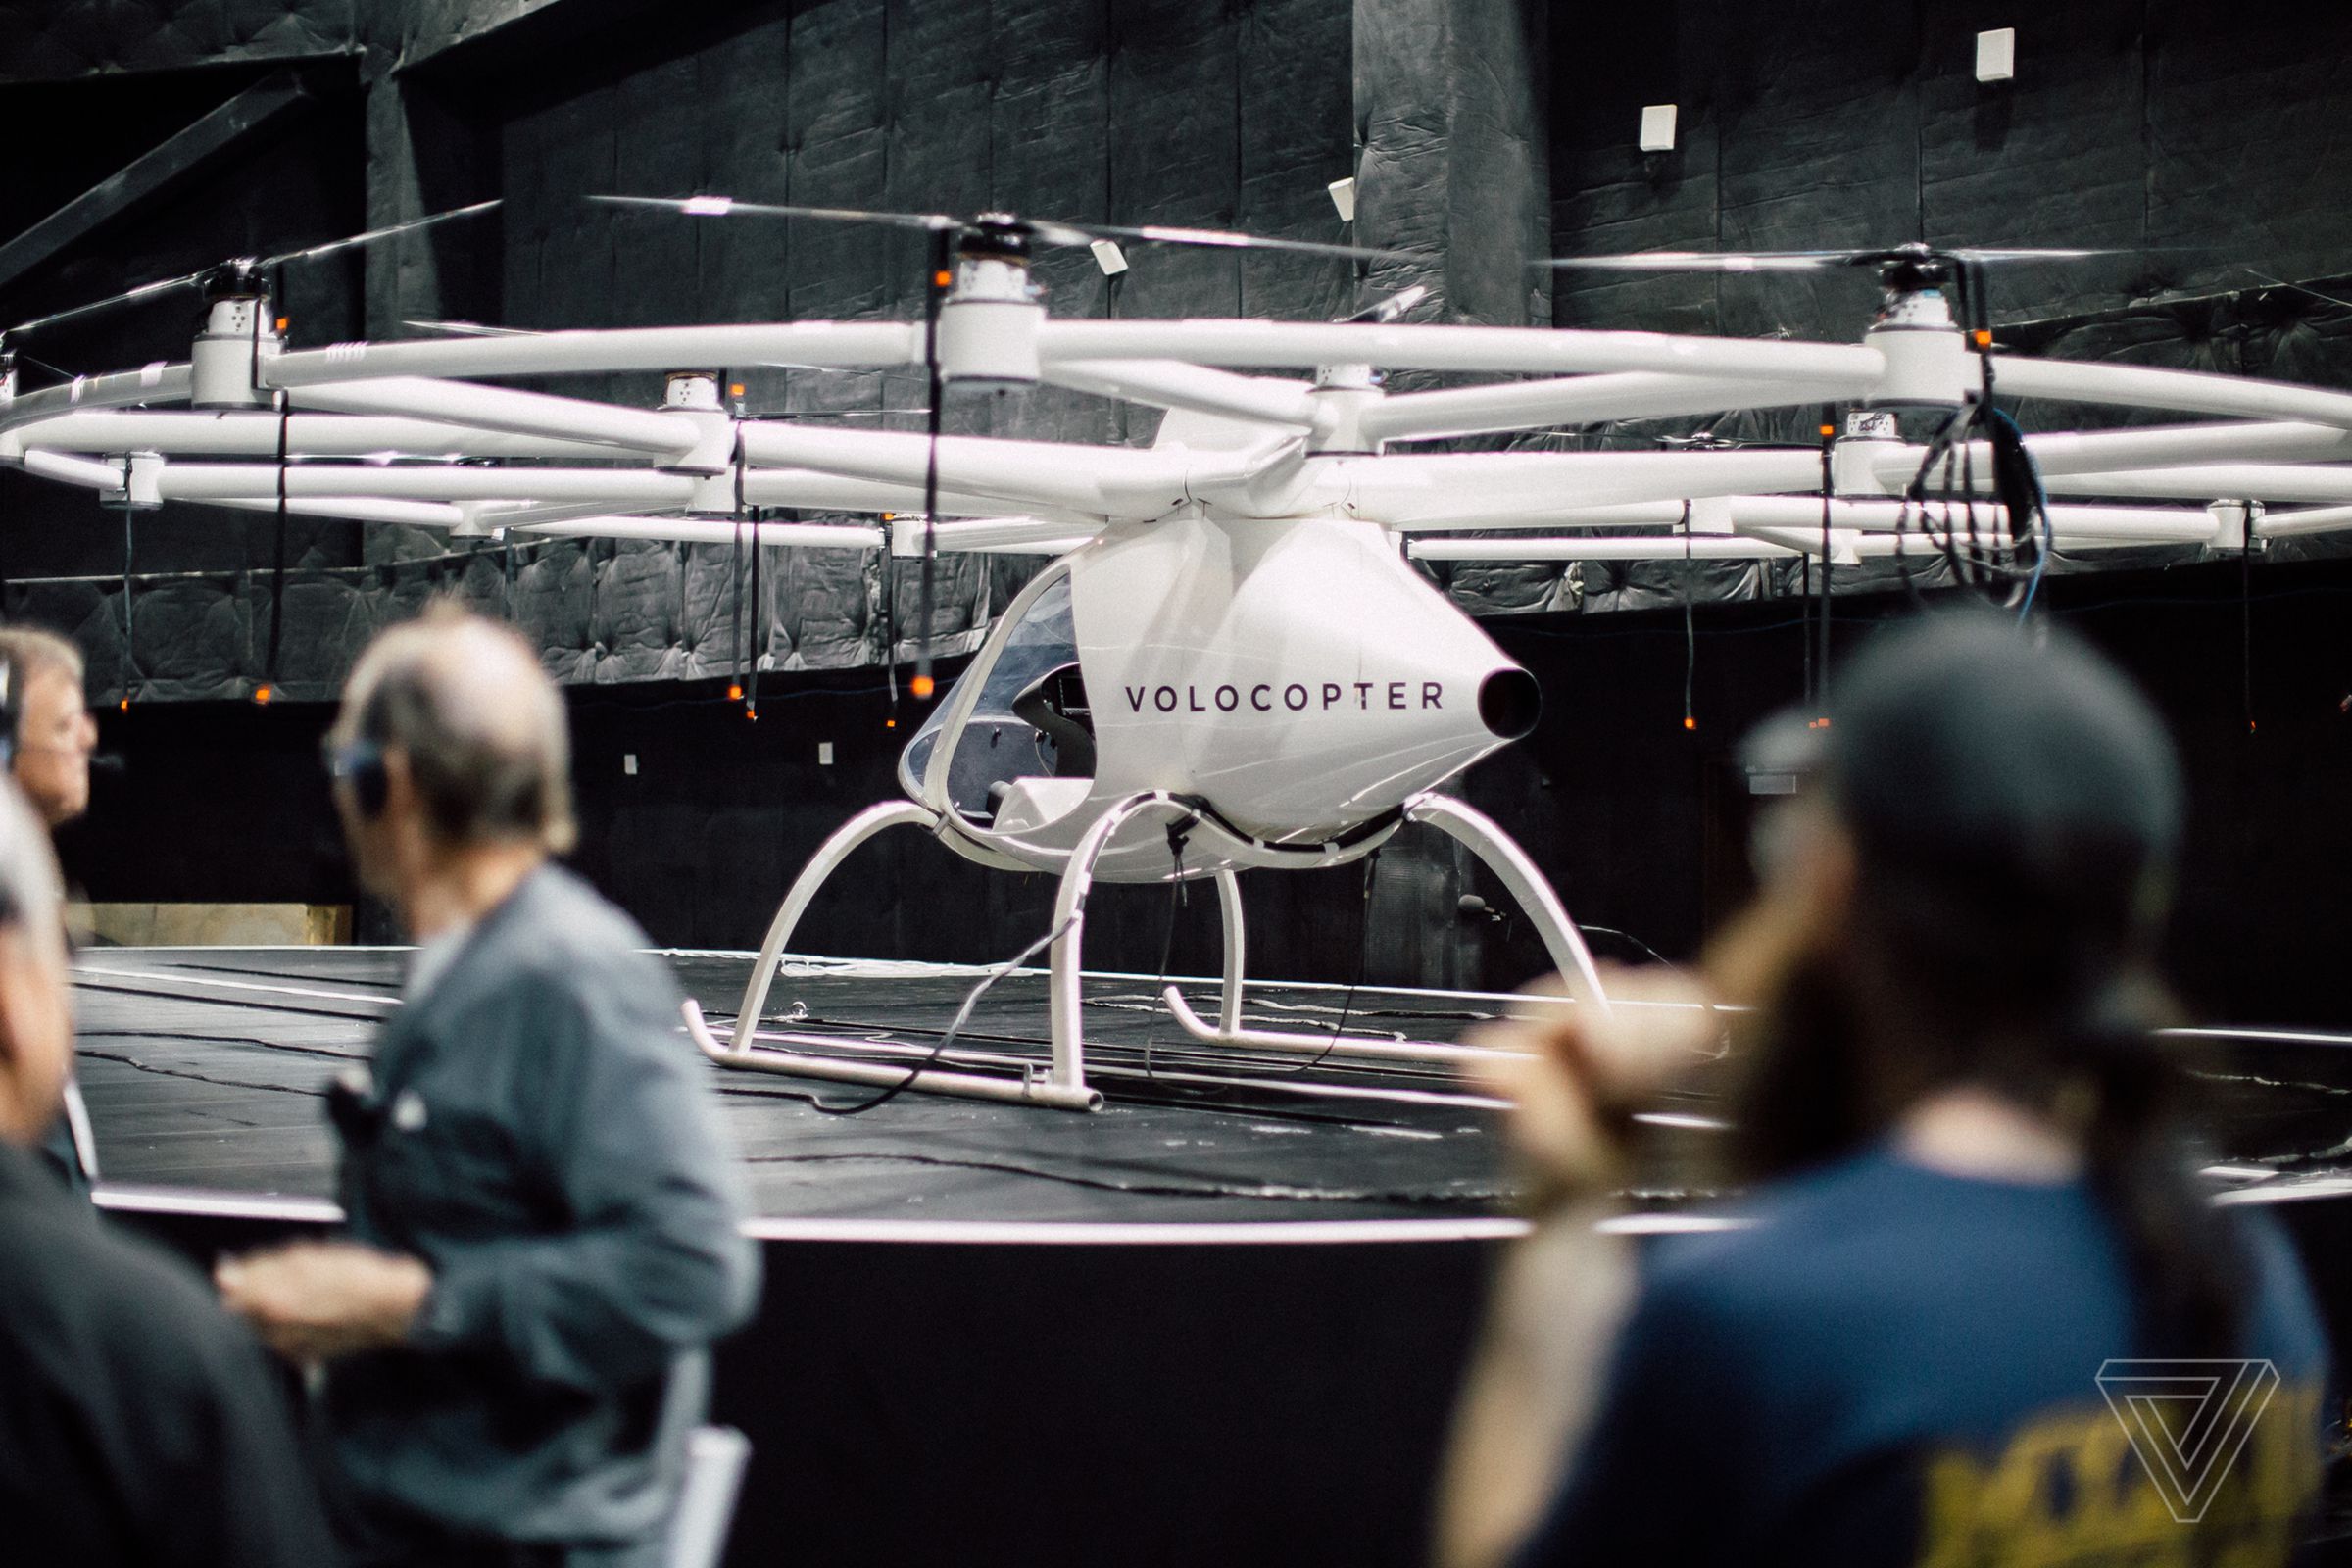 Backstage with the Volocopter.